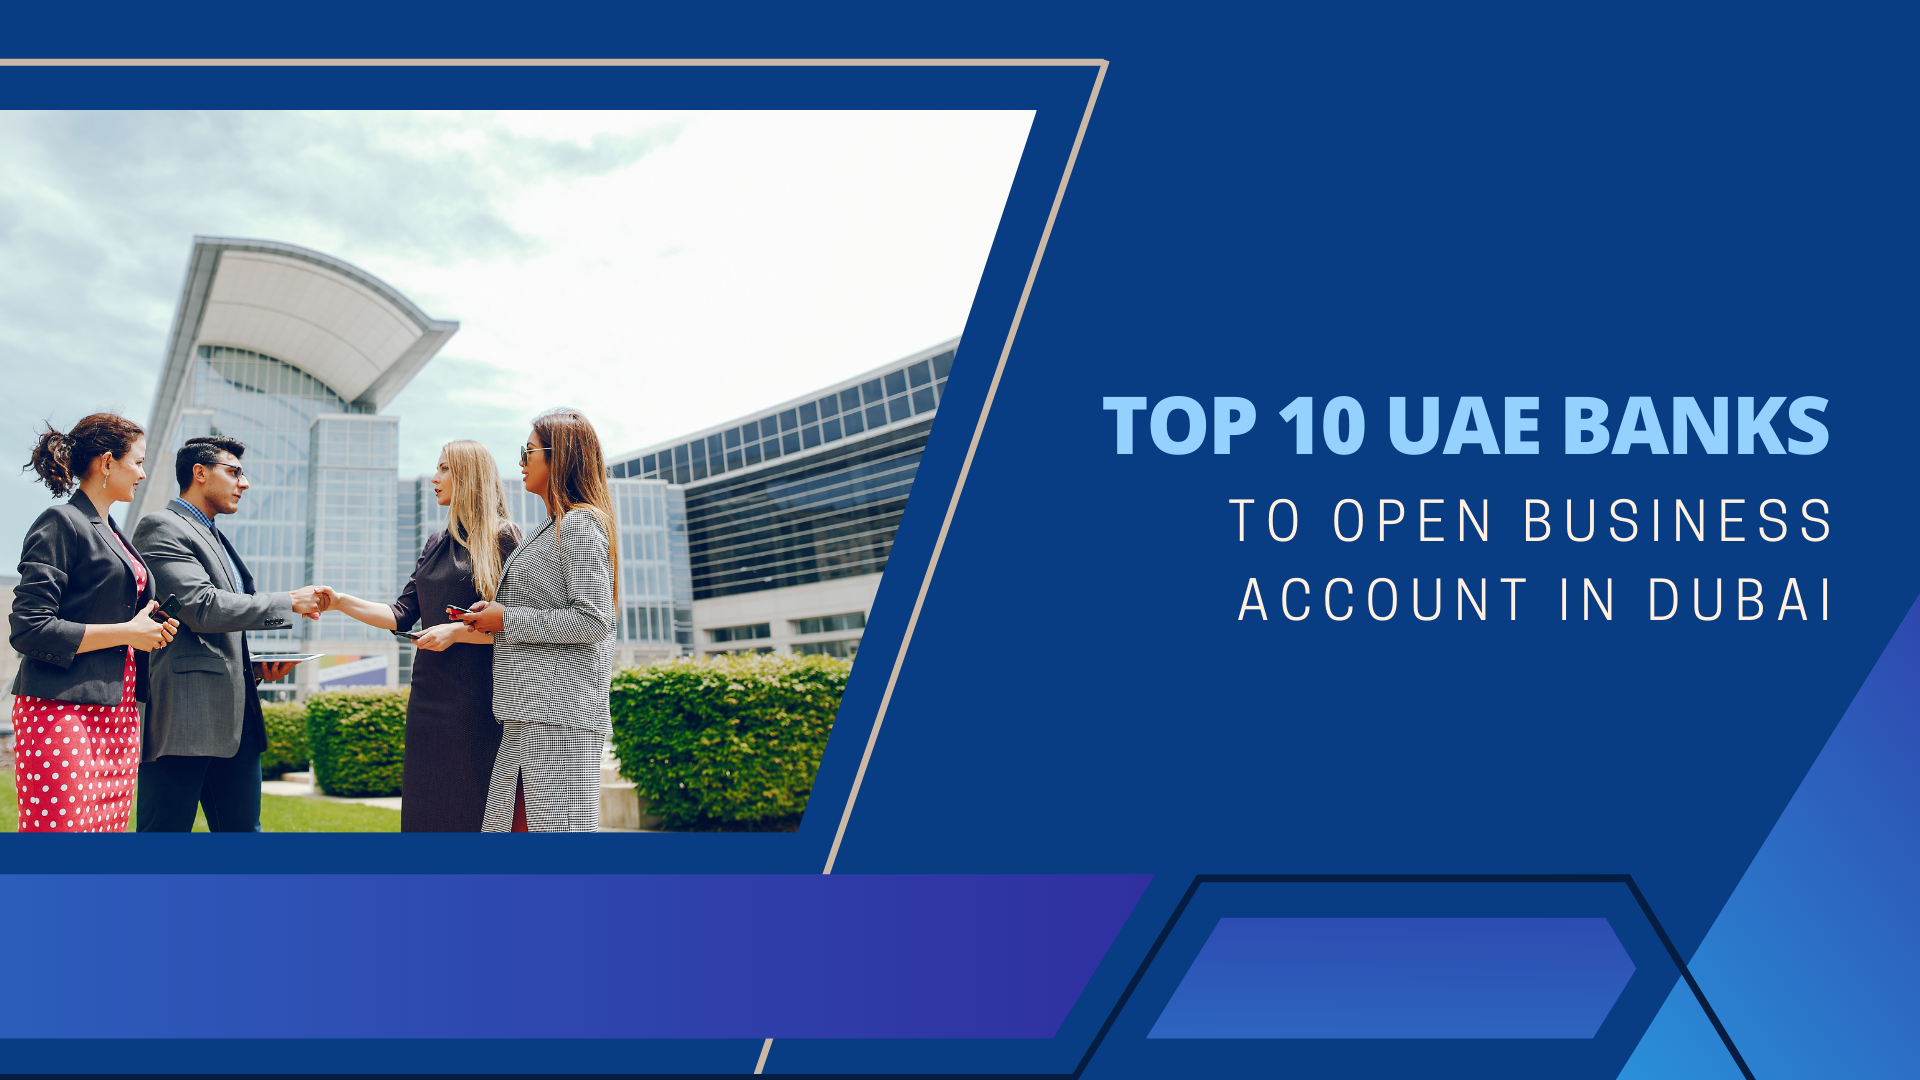 TOP-10-UAE-BANKS-TO-OPEN-BUSINESS-ACCOUNT-IN-DUBAI